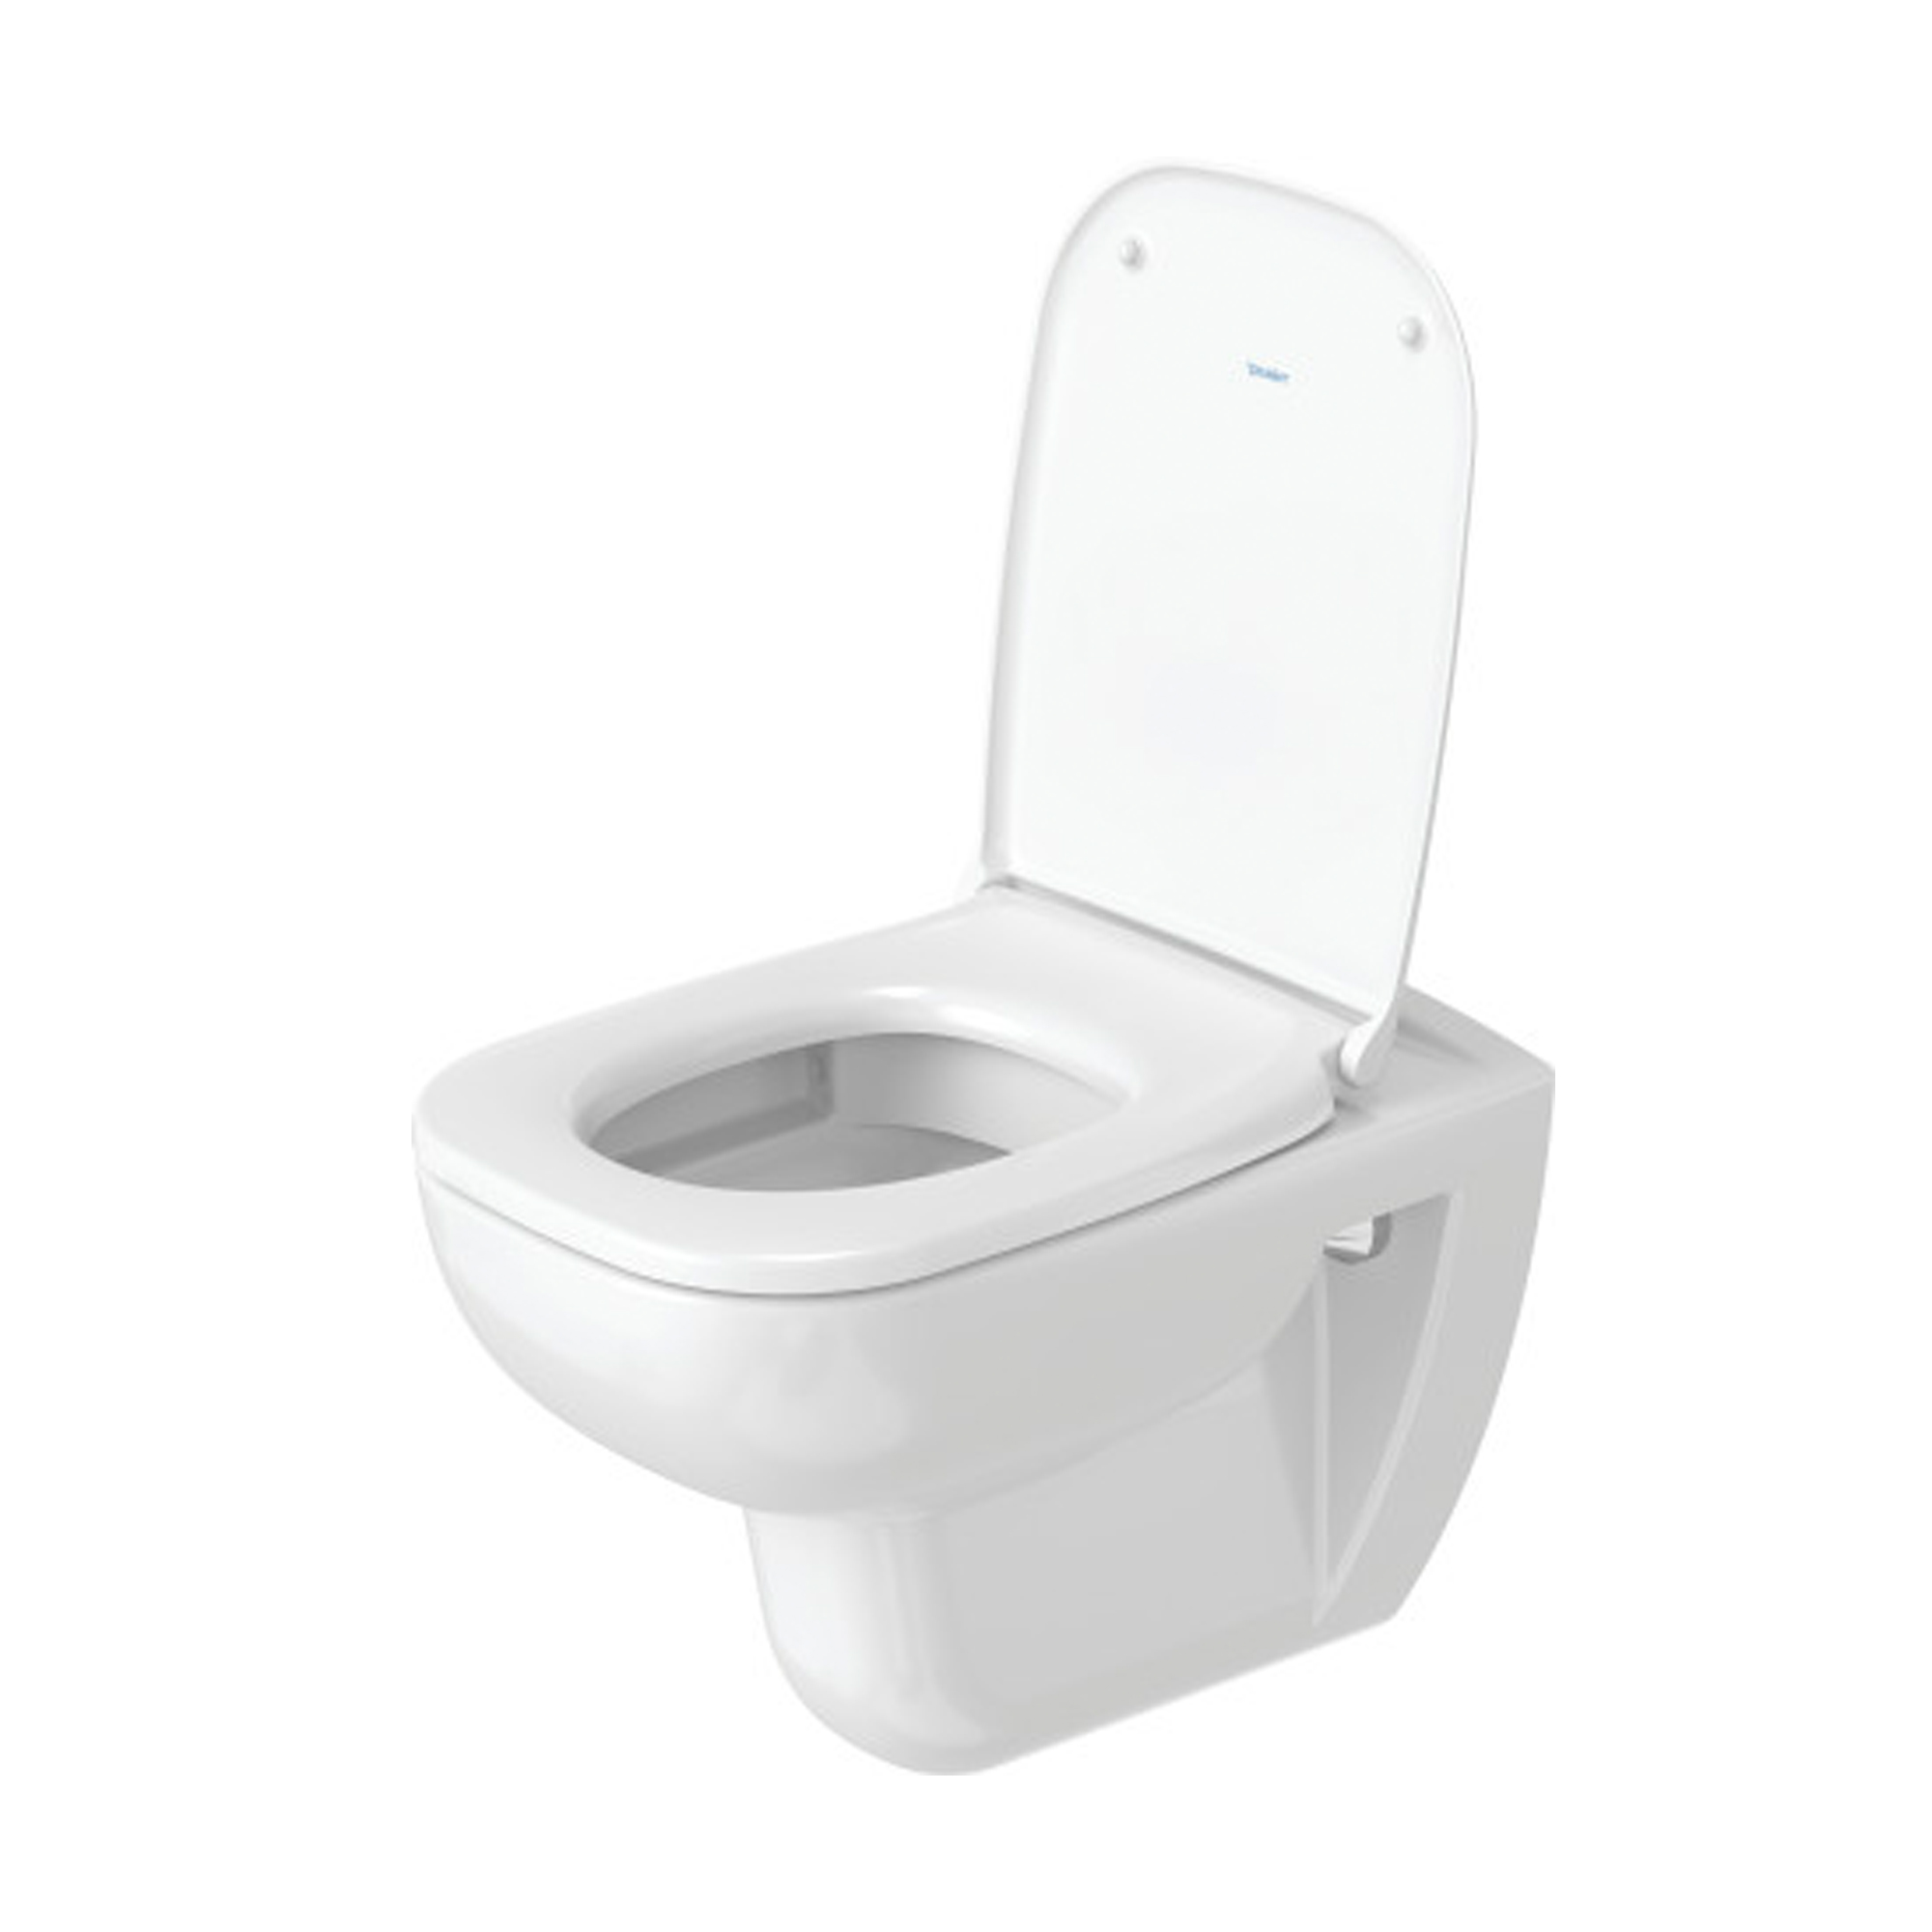 Duravit D-code 0067390000 Toilet Seat With Soft Close Hinges White for sale online 